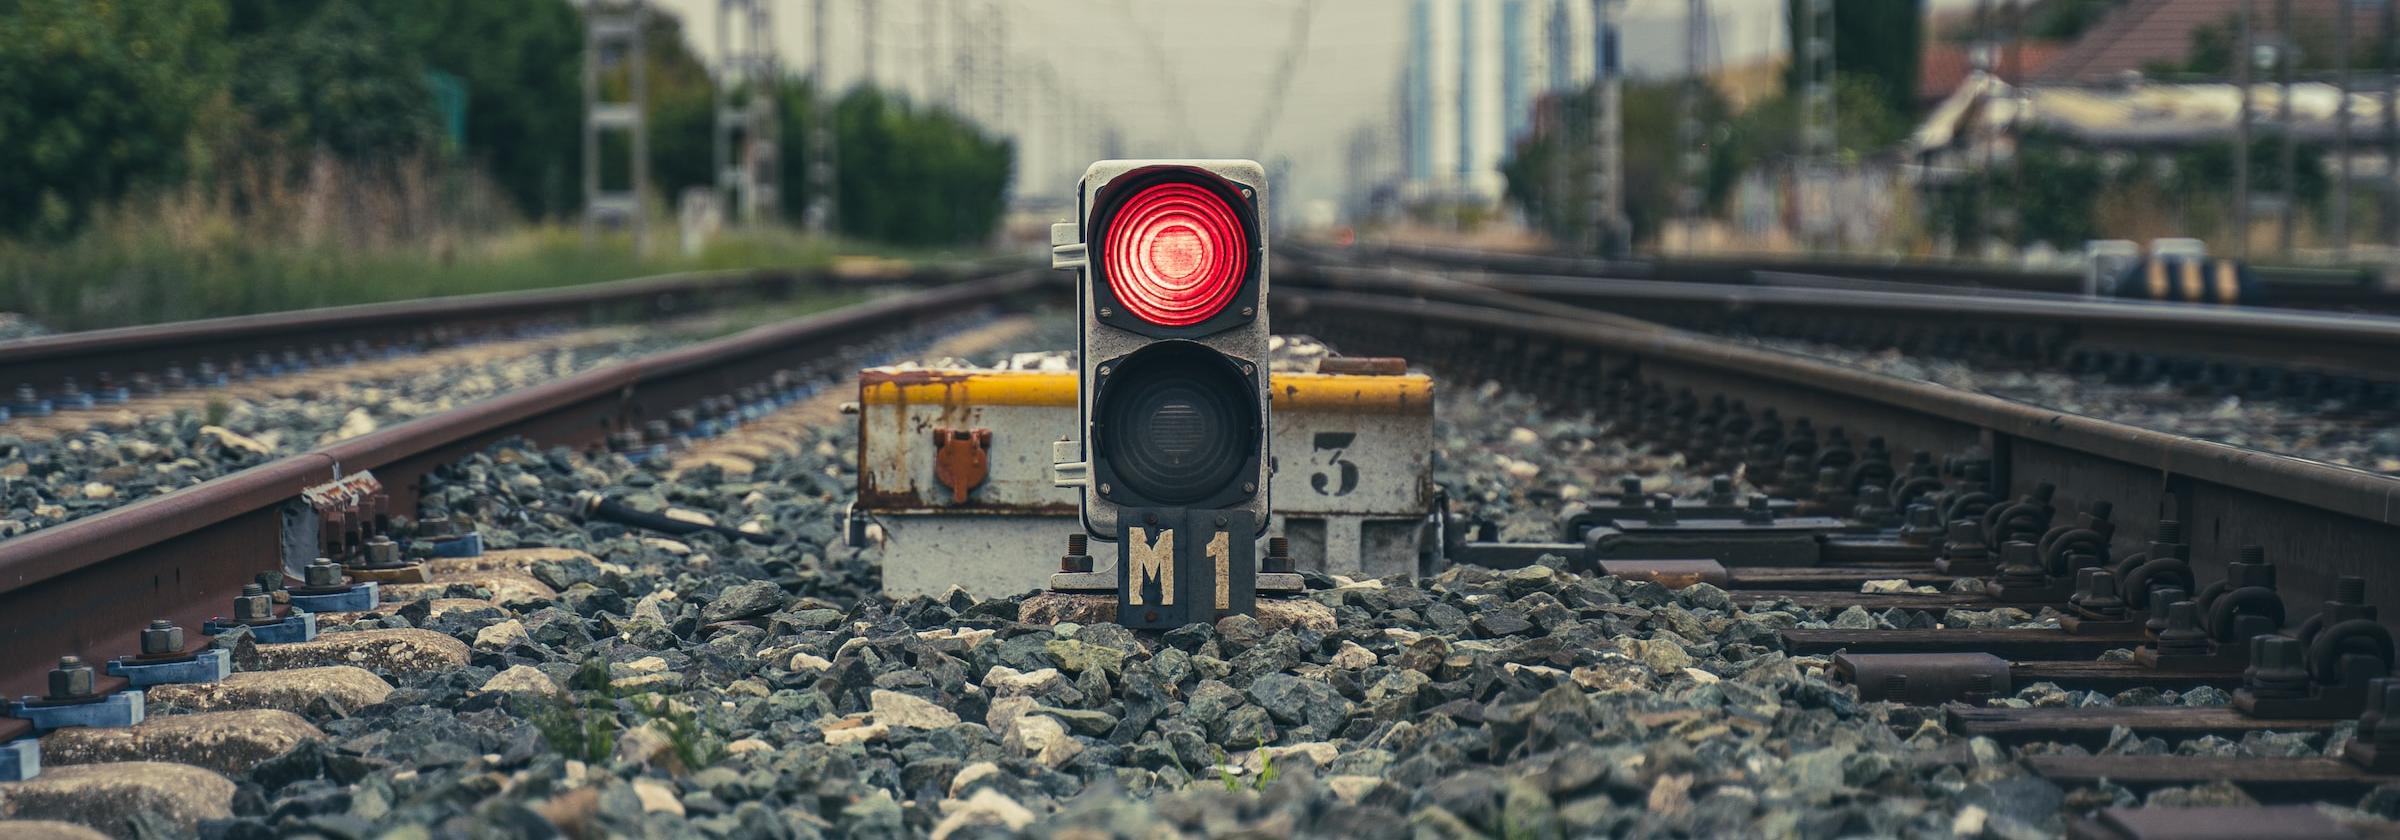 A red light sitting between two sets of railway tracks